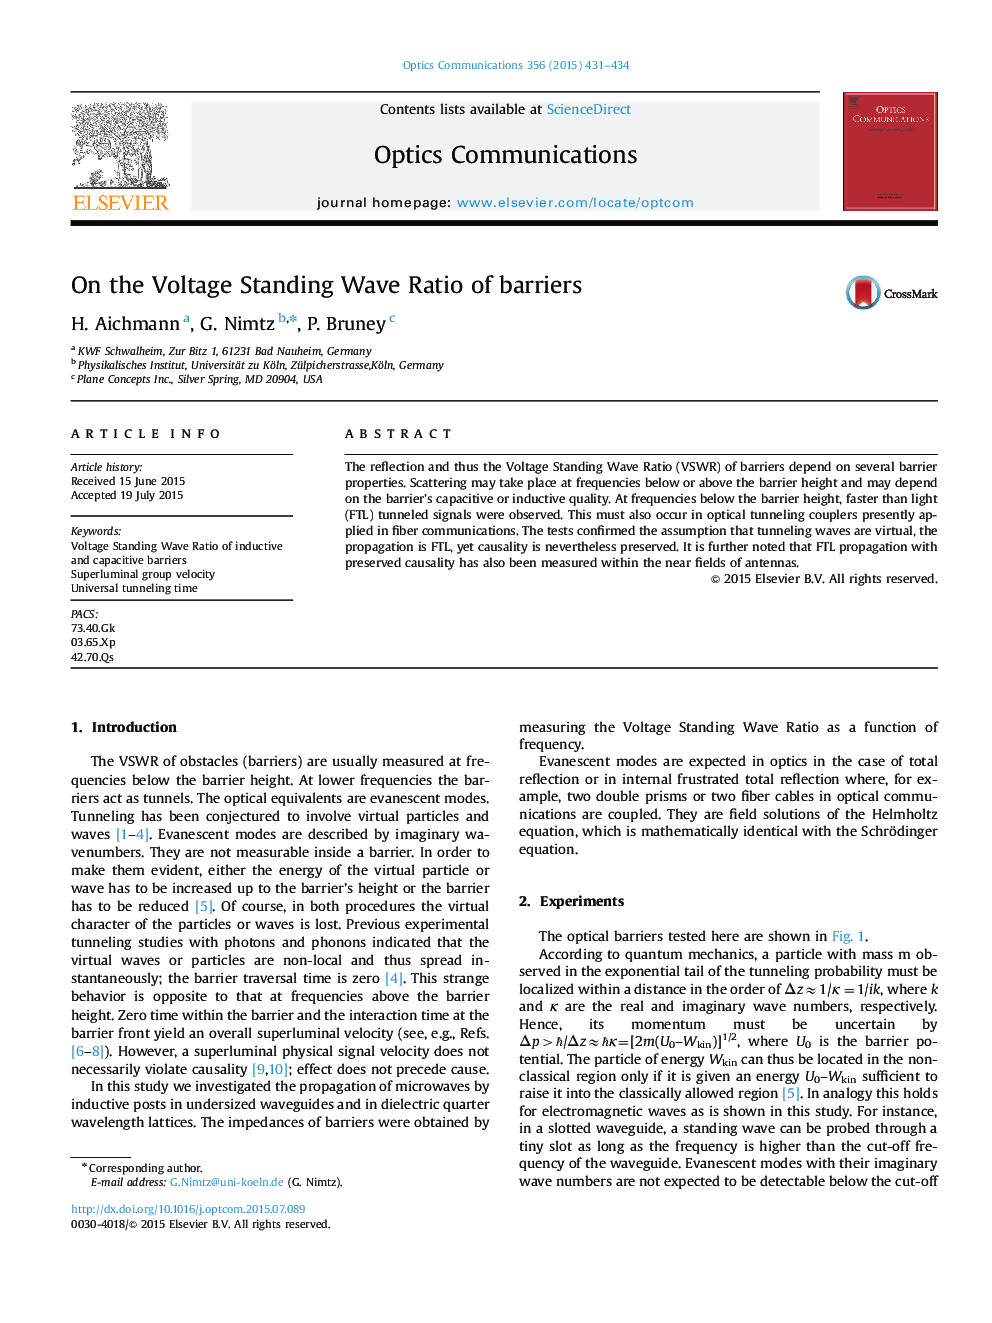 On the Voltage Standing Wave Ratio of barriers